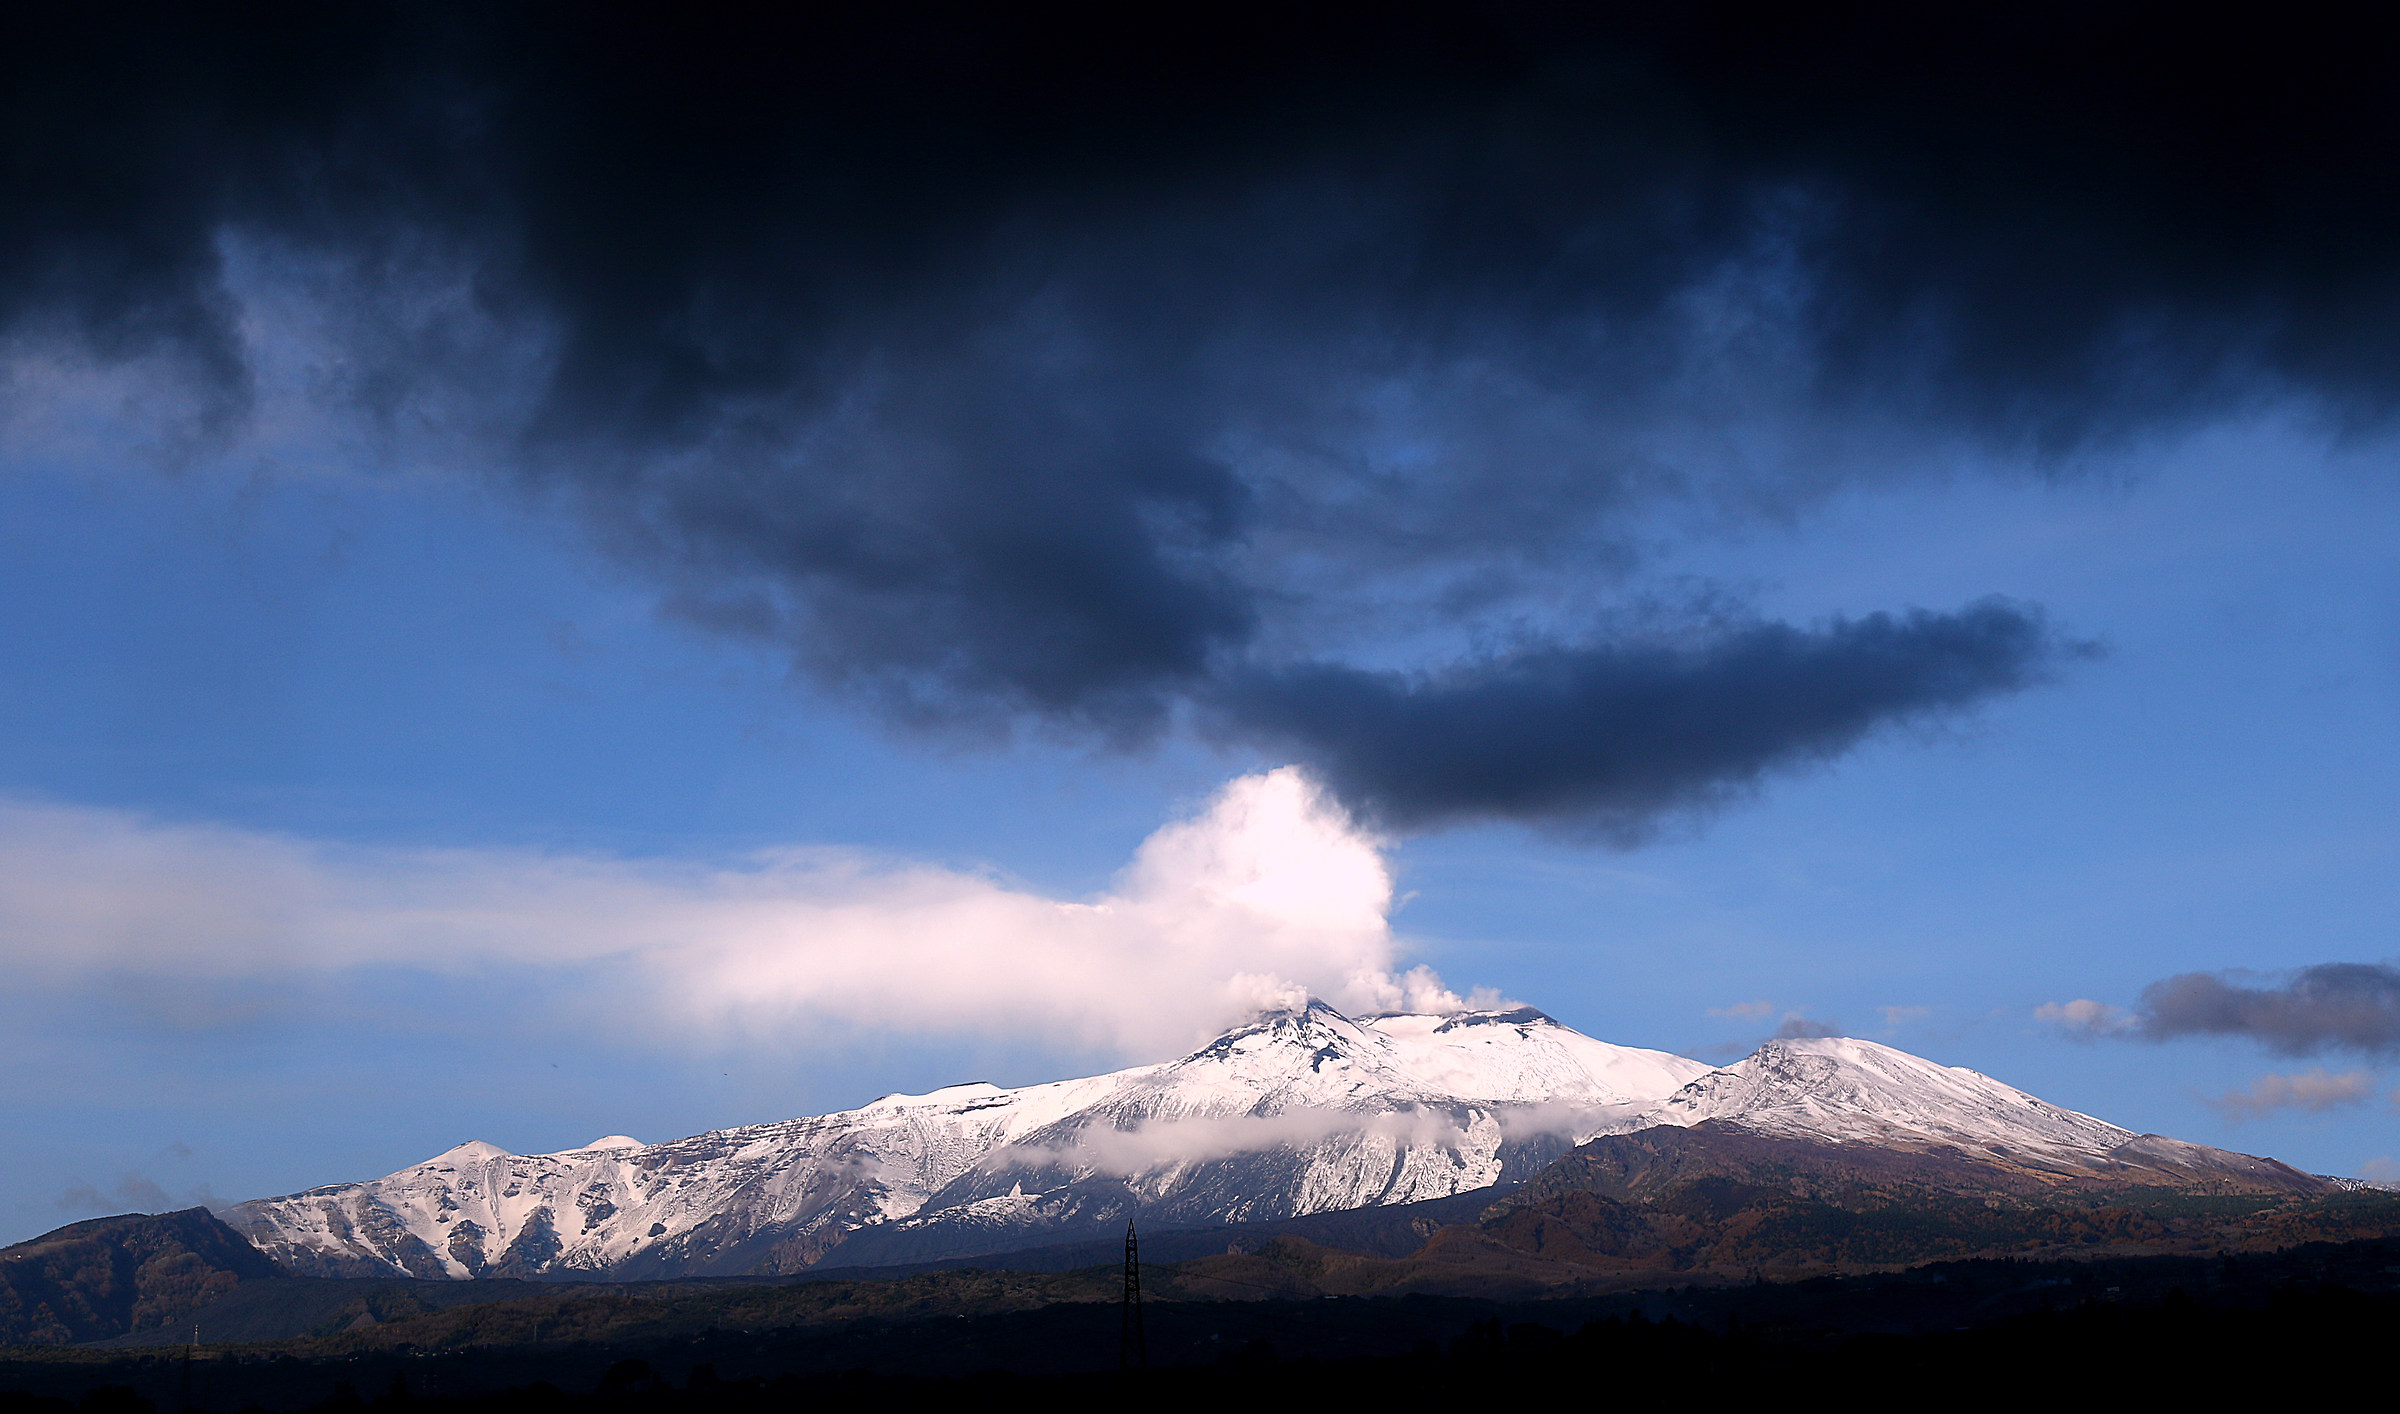 Stormy skies are gathering on Mount Etna....